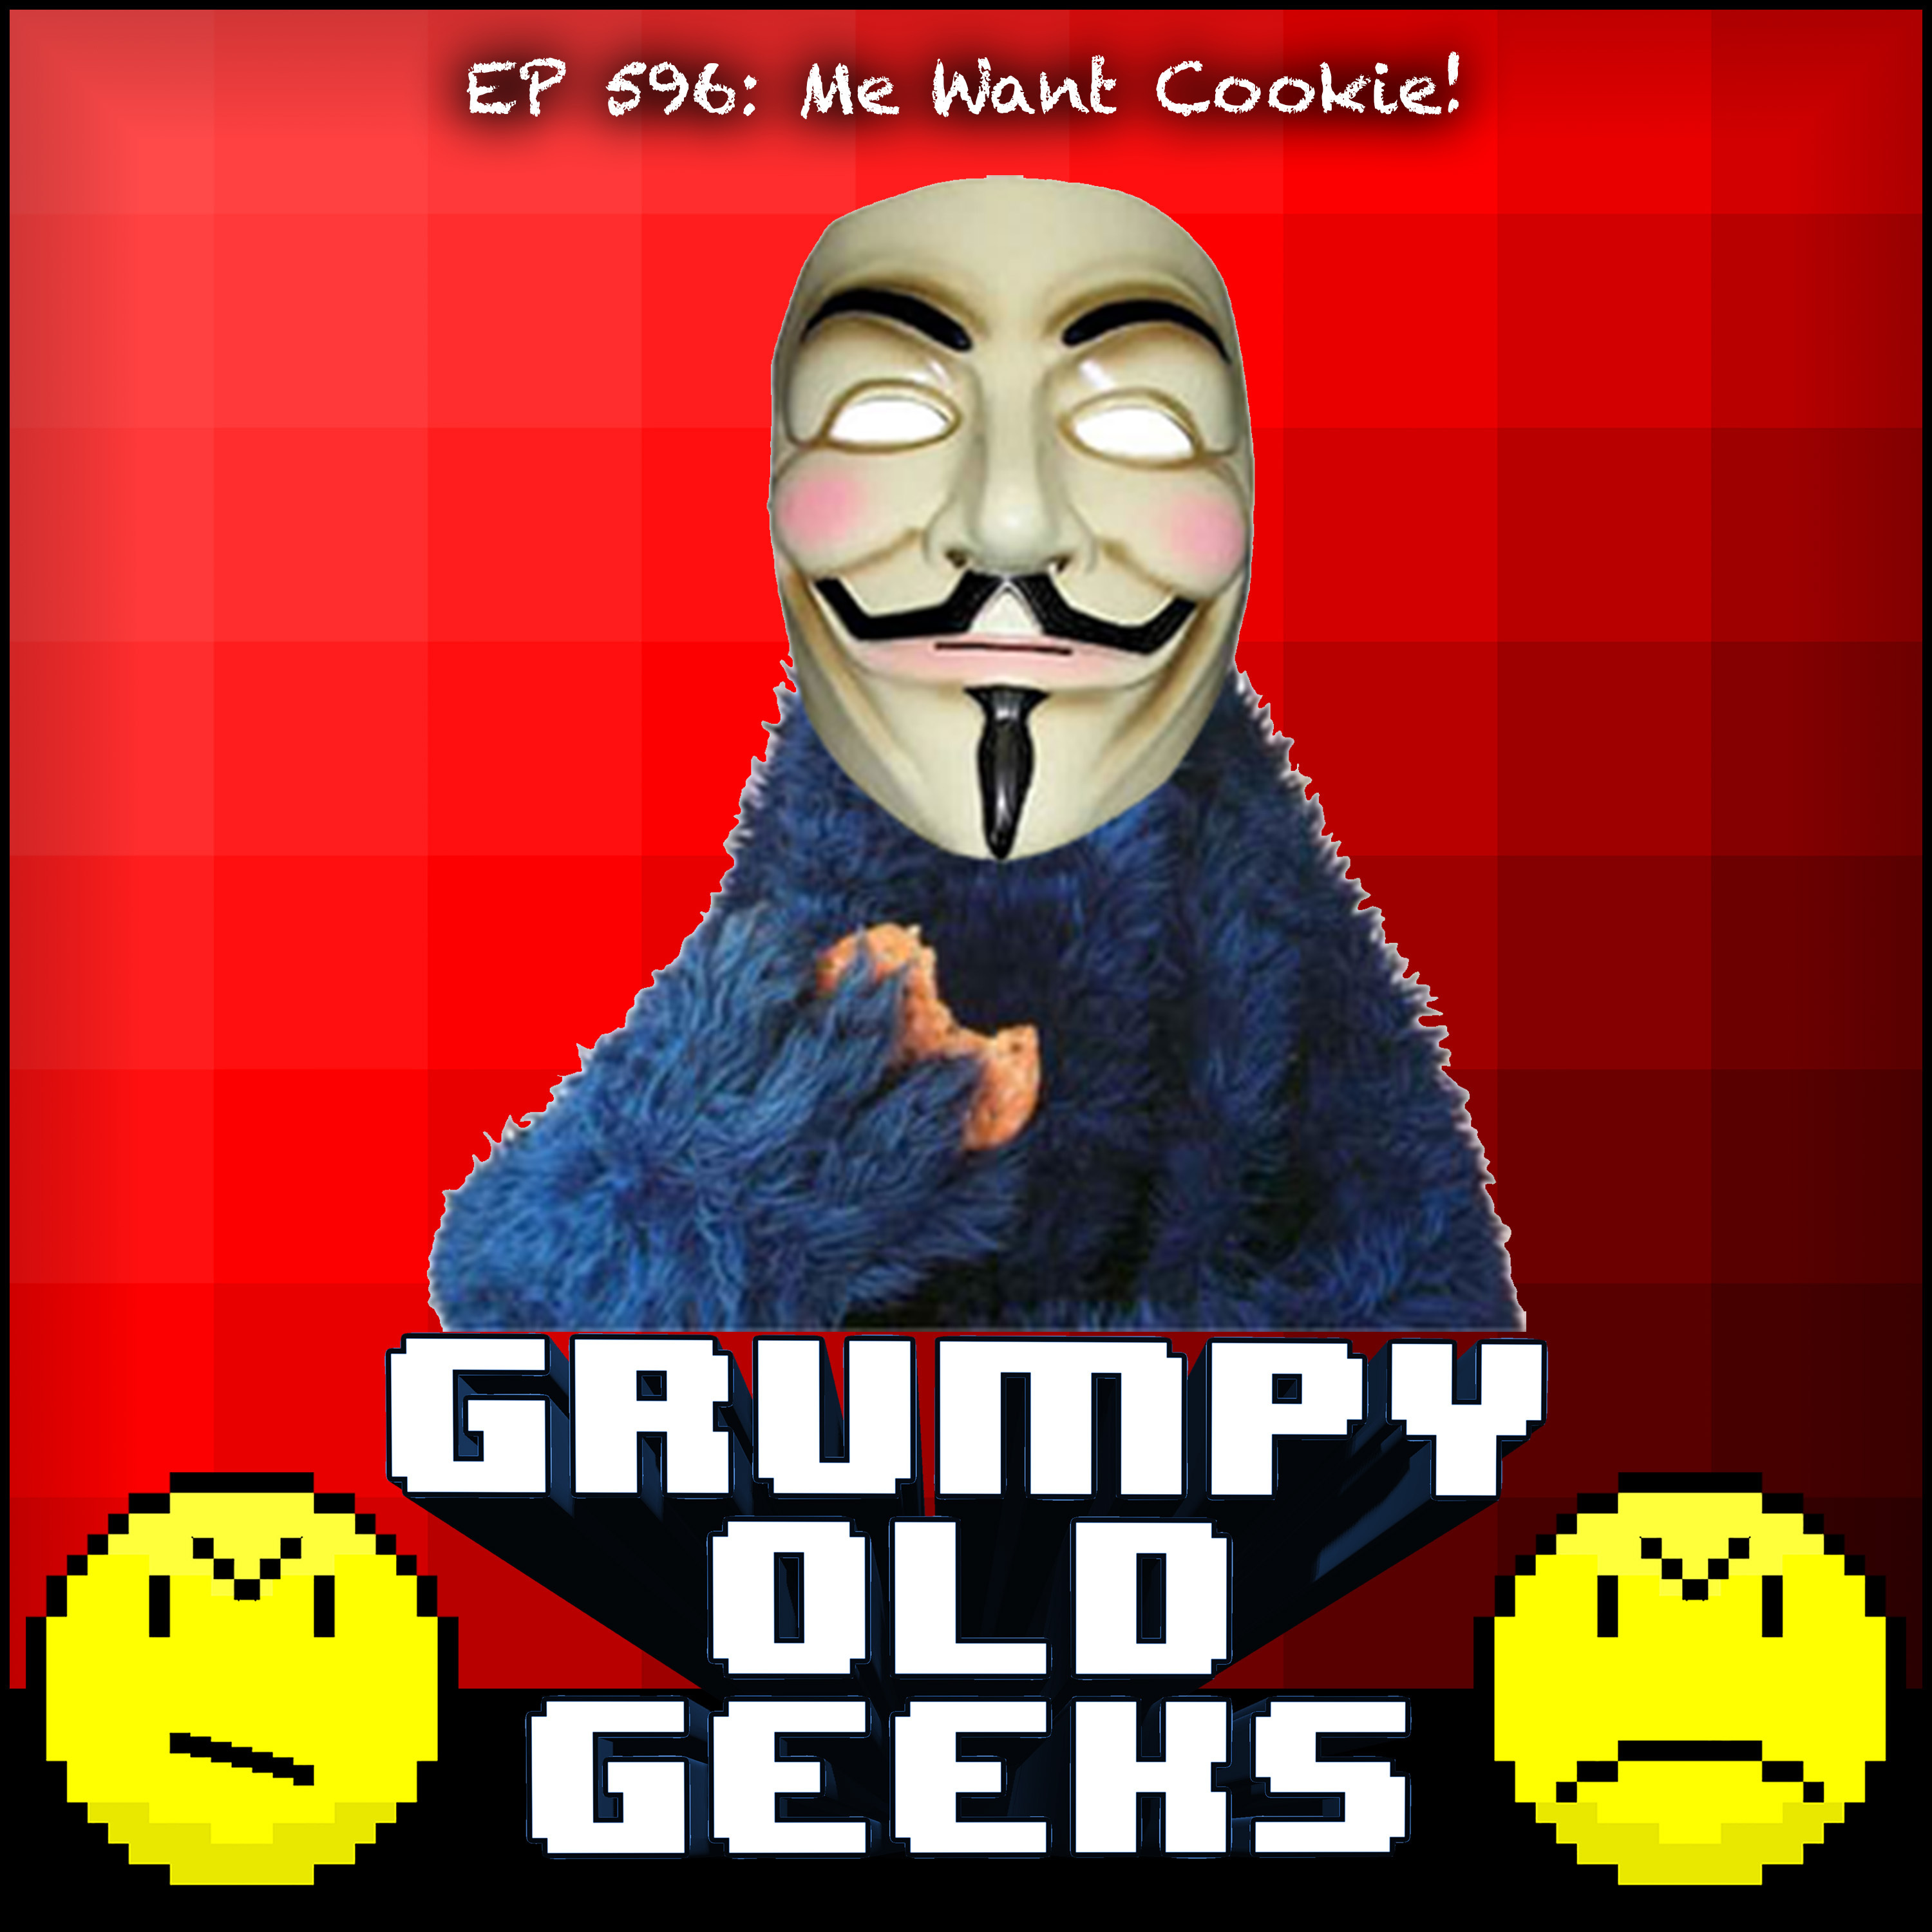 596: Me Want Cookie!